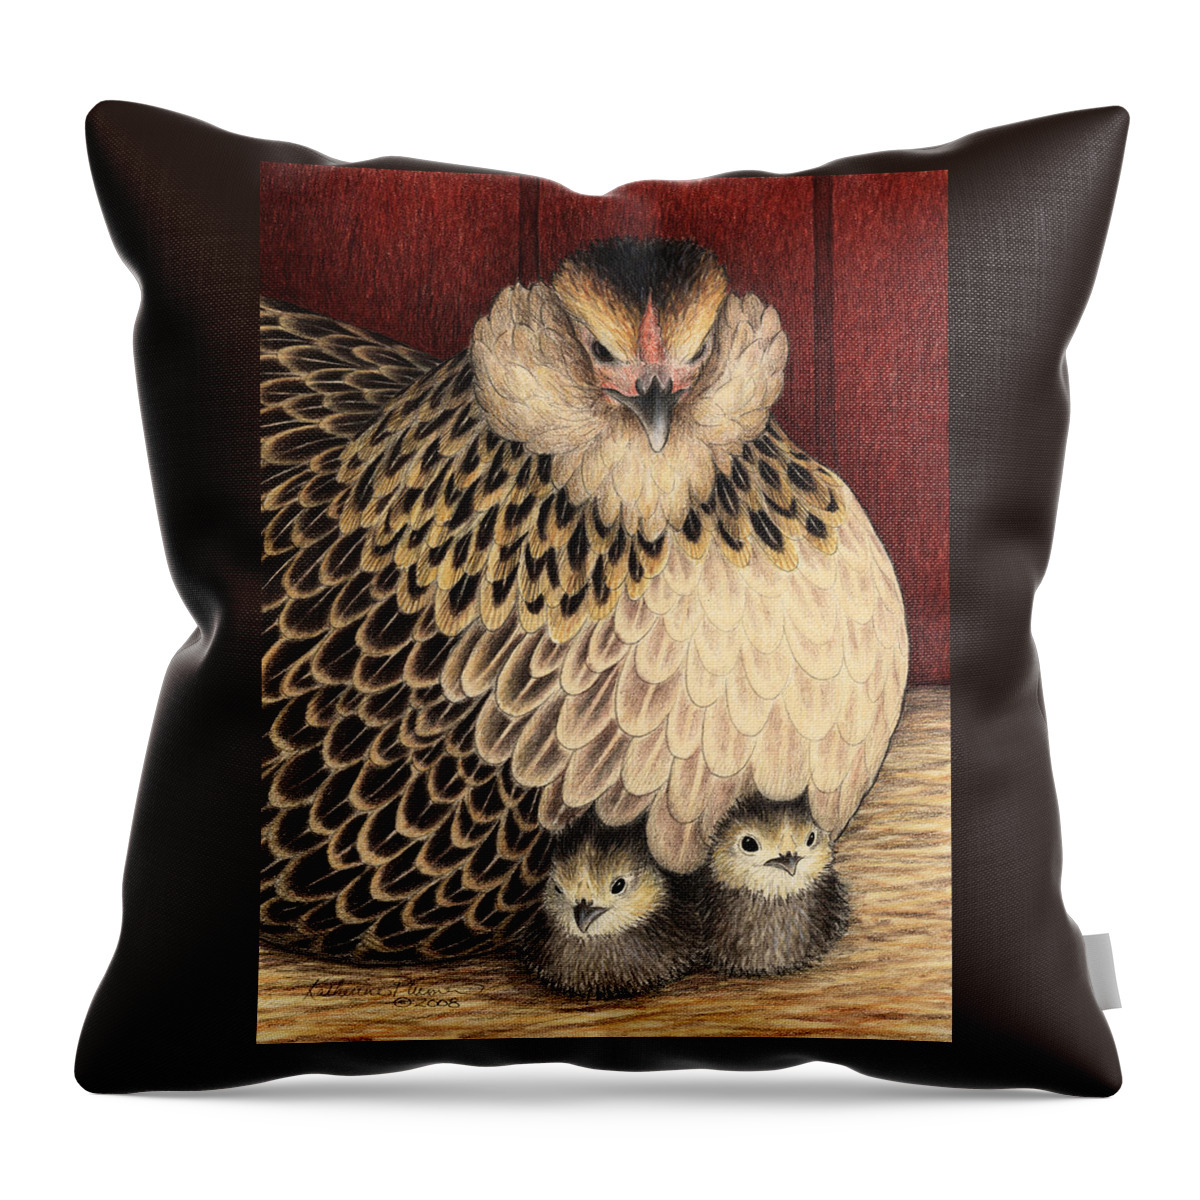 Hen Throw Pillow featuring the drawing New Arrivals by Katherine Plumer